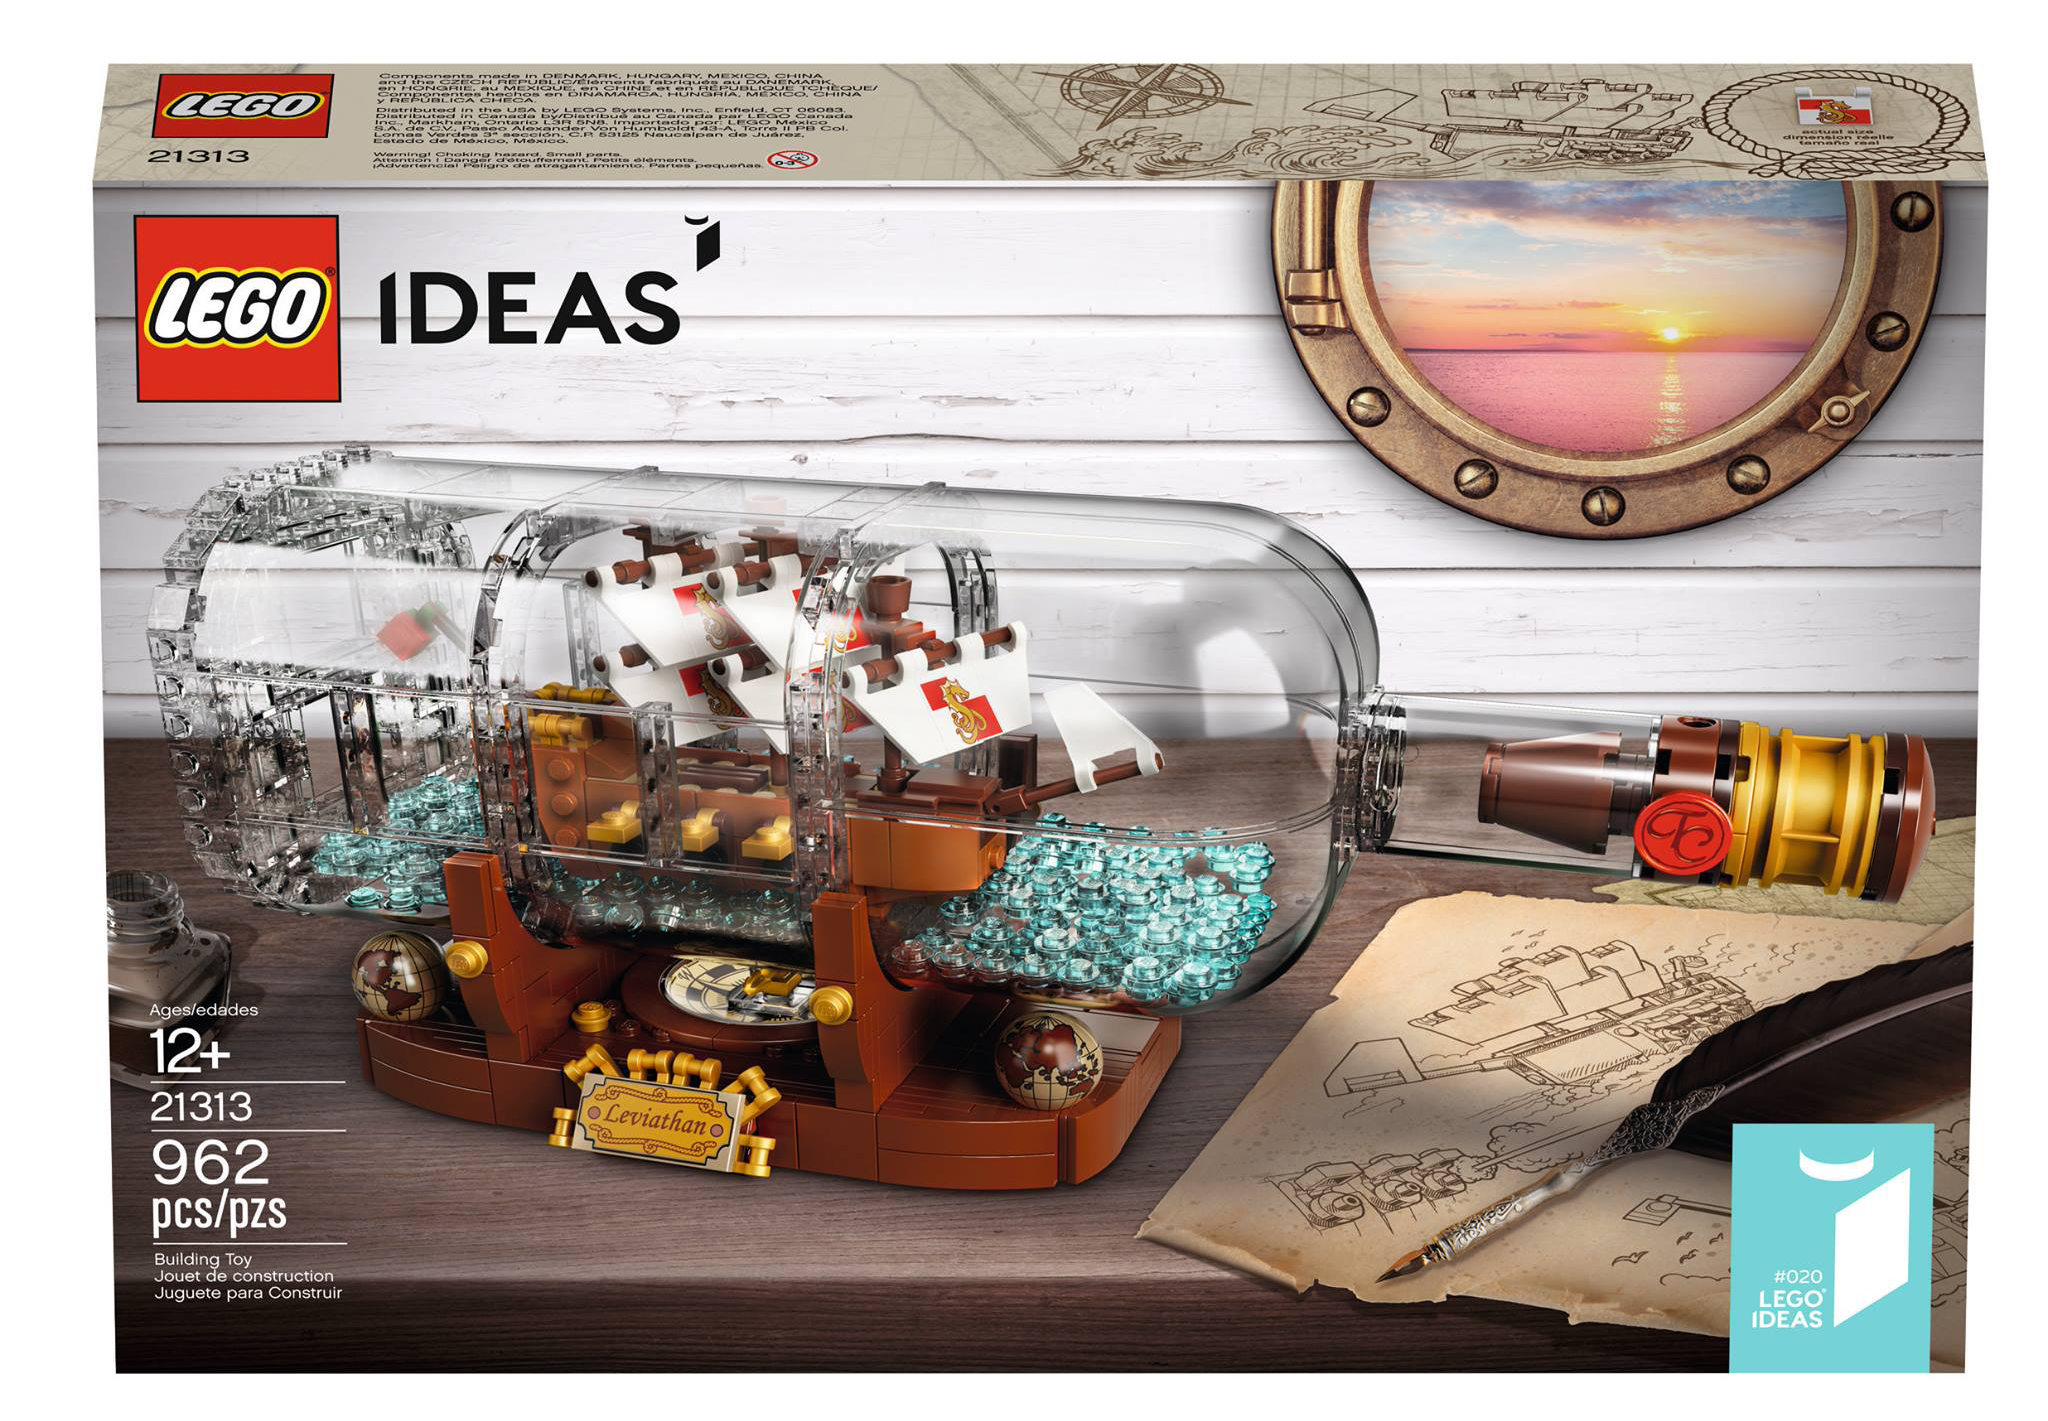 LEGO ship in a bottle – Sound Books